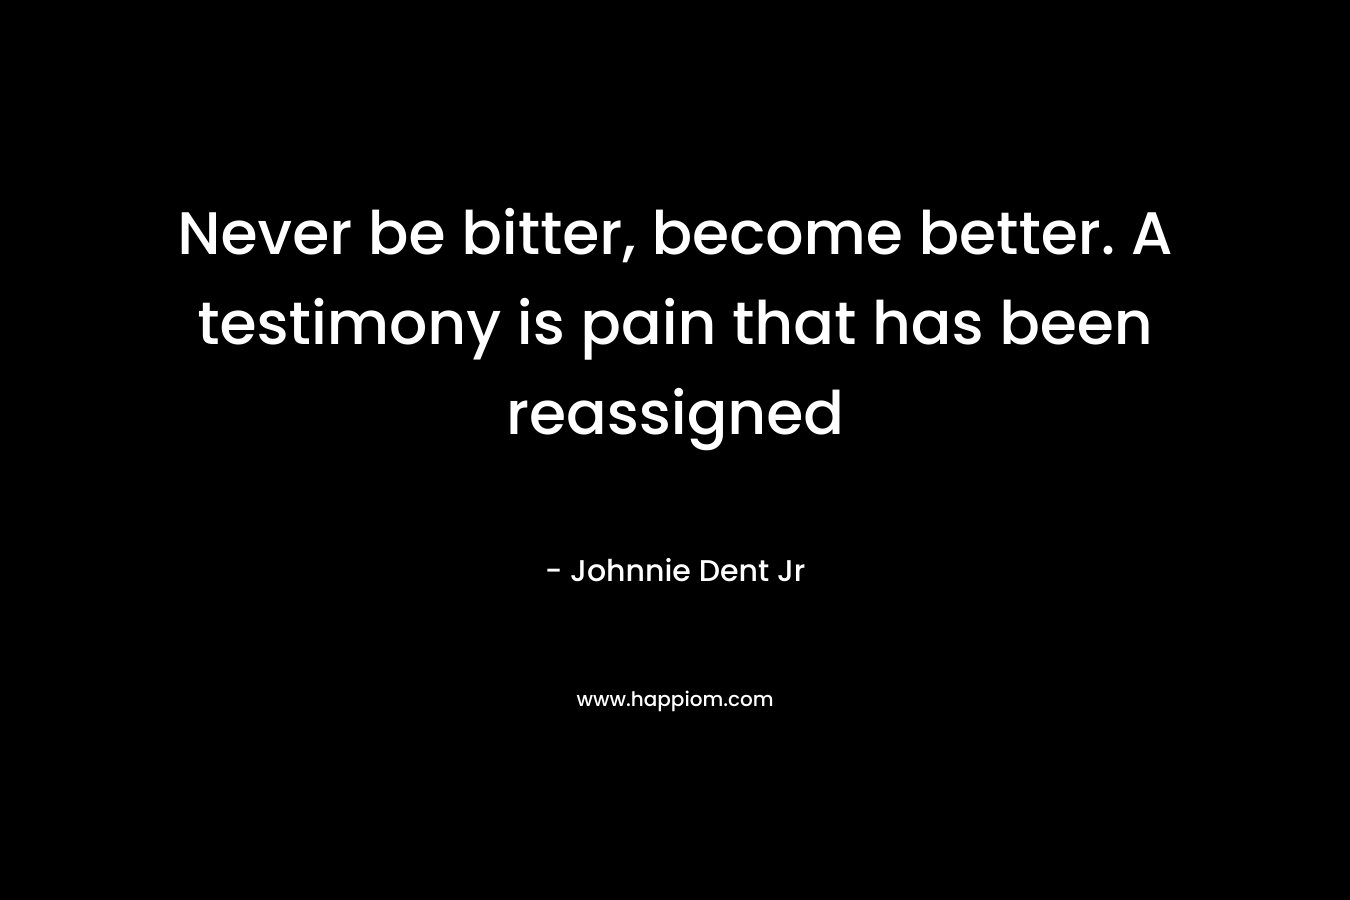 Never be bitter, become better. A testimony is pain that has been reassigned